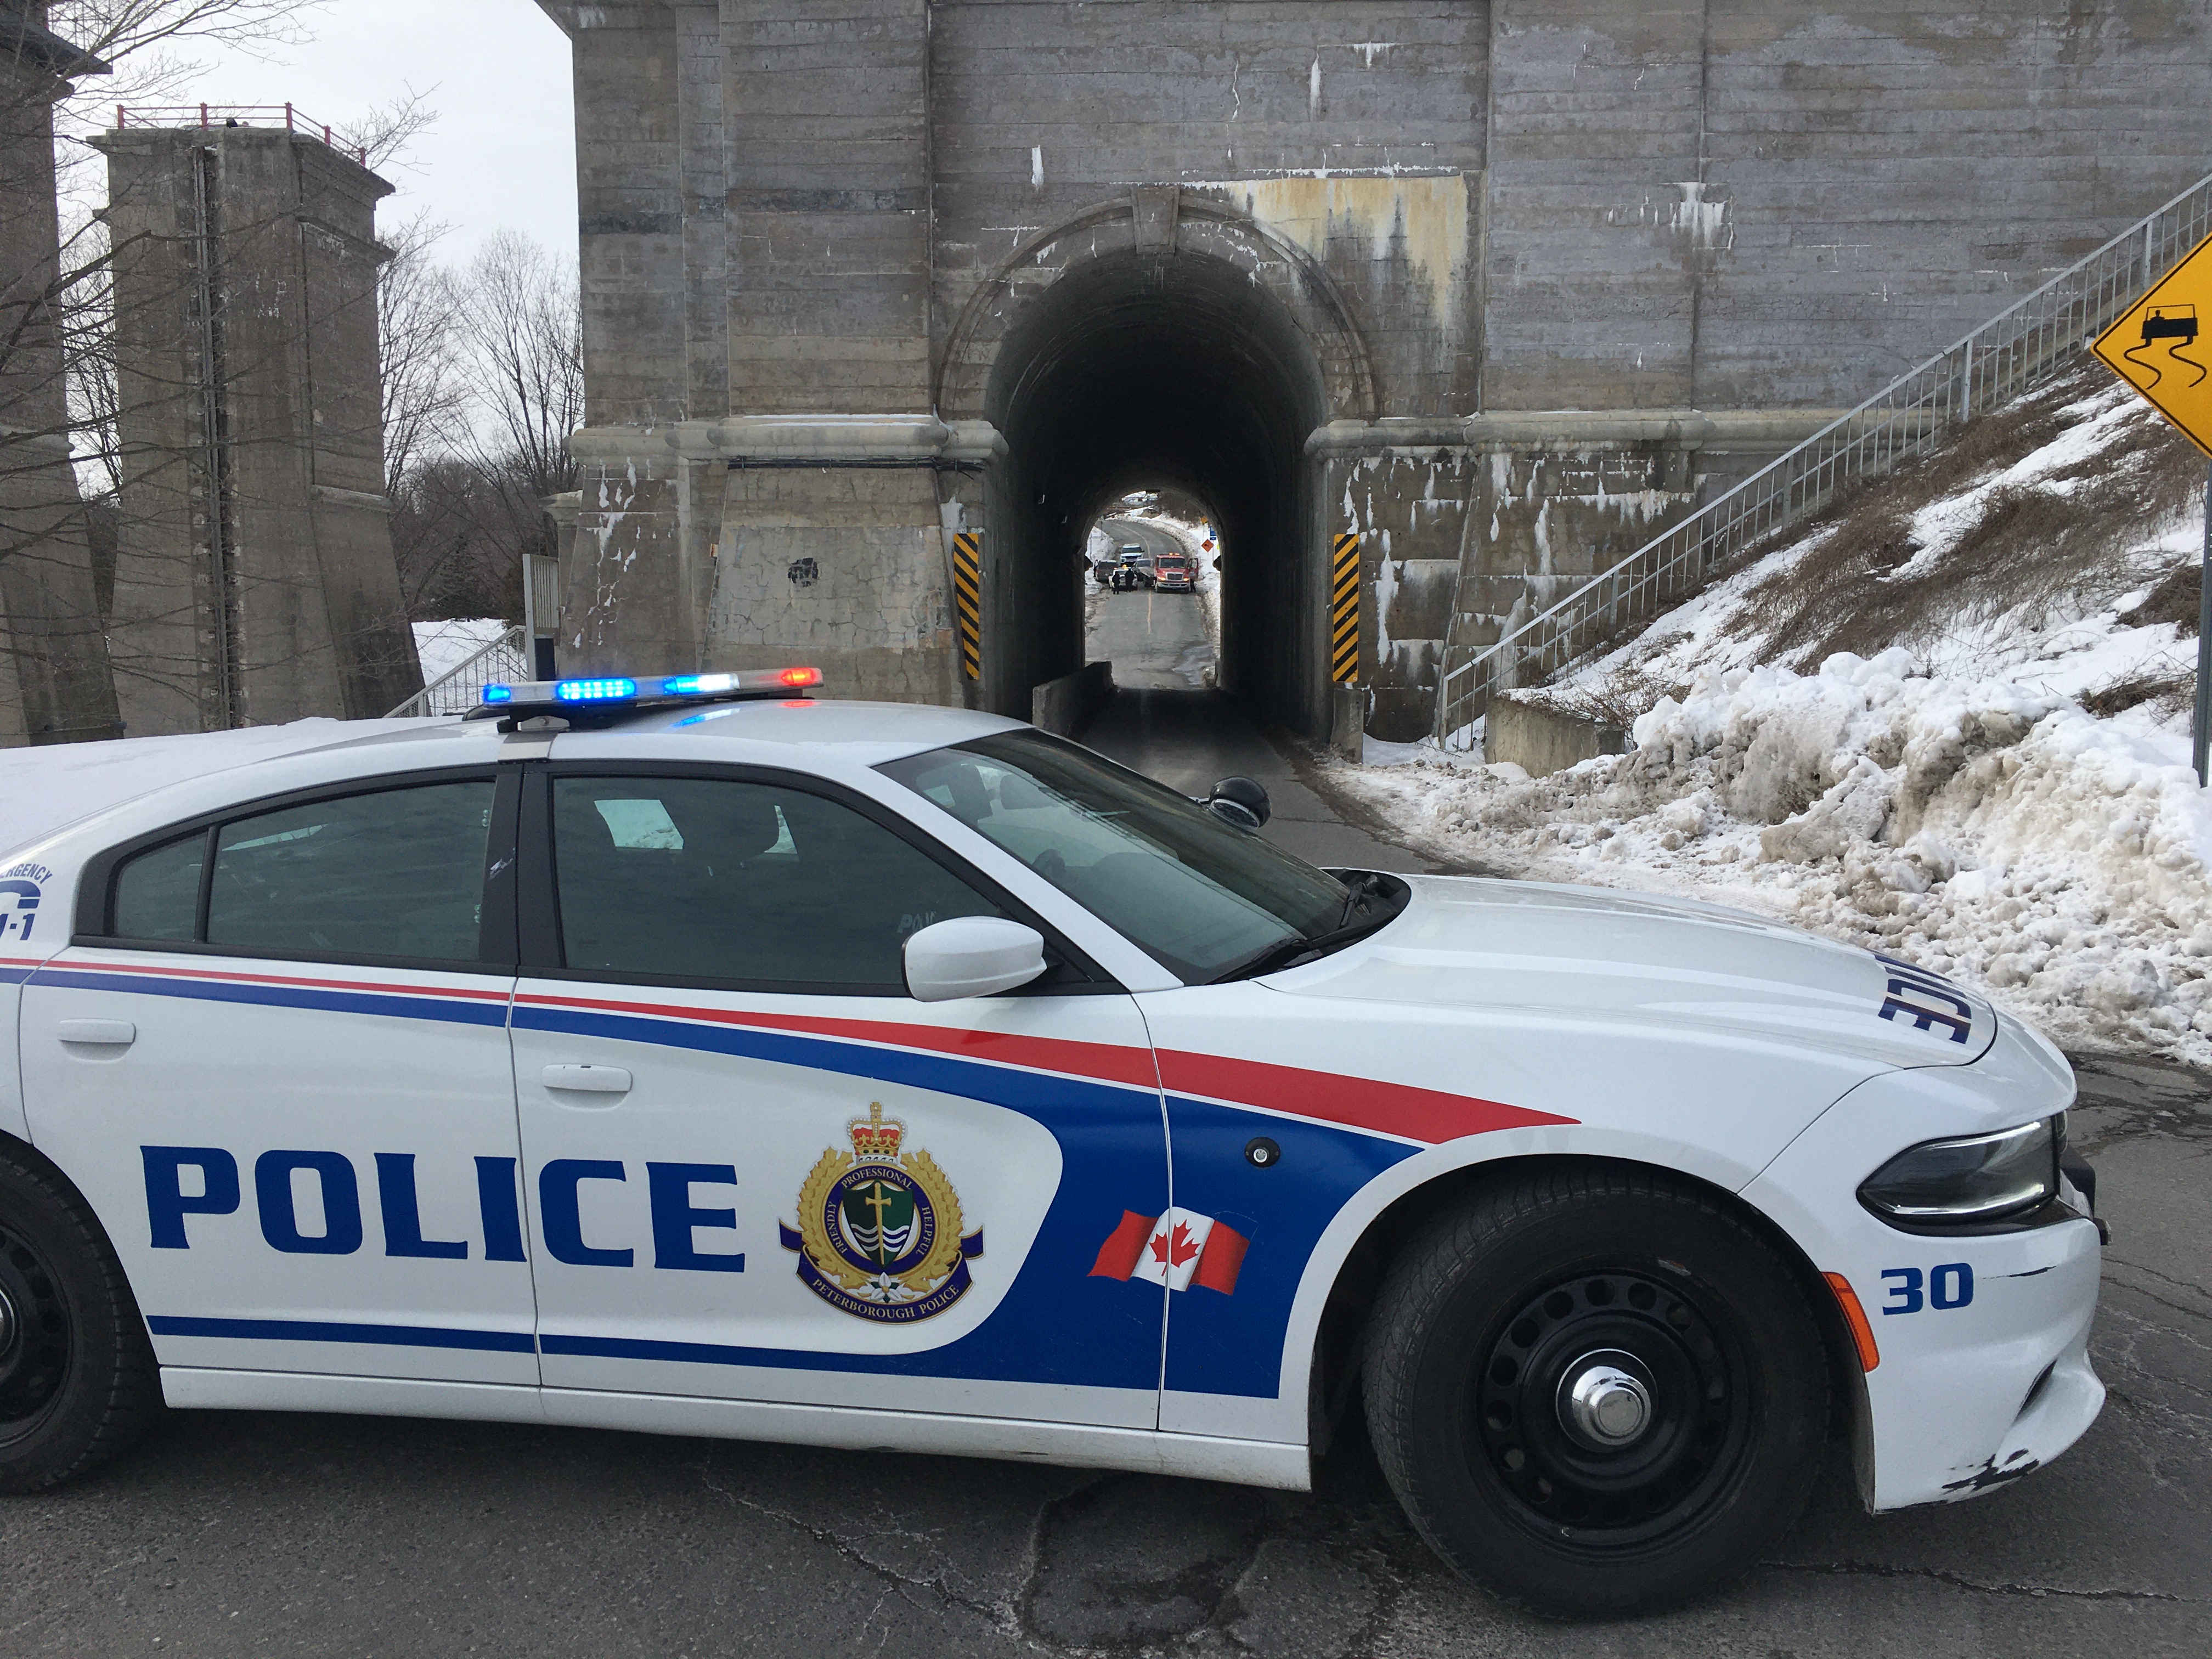 Police close access to Peterborough Lift Lock for investigation image